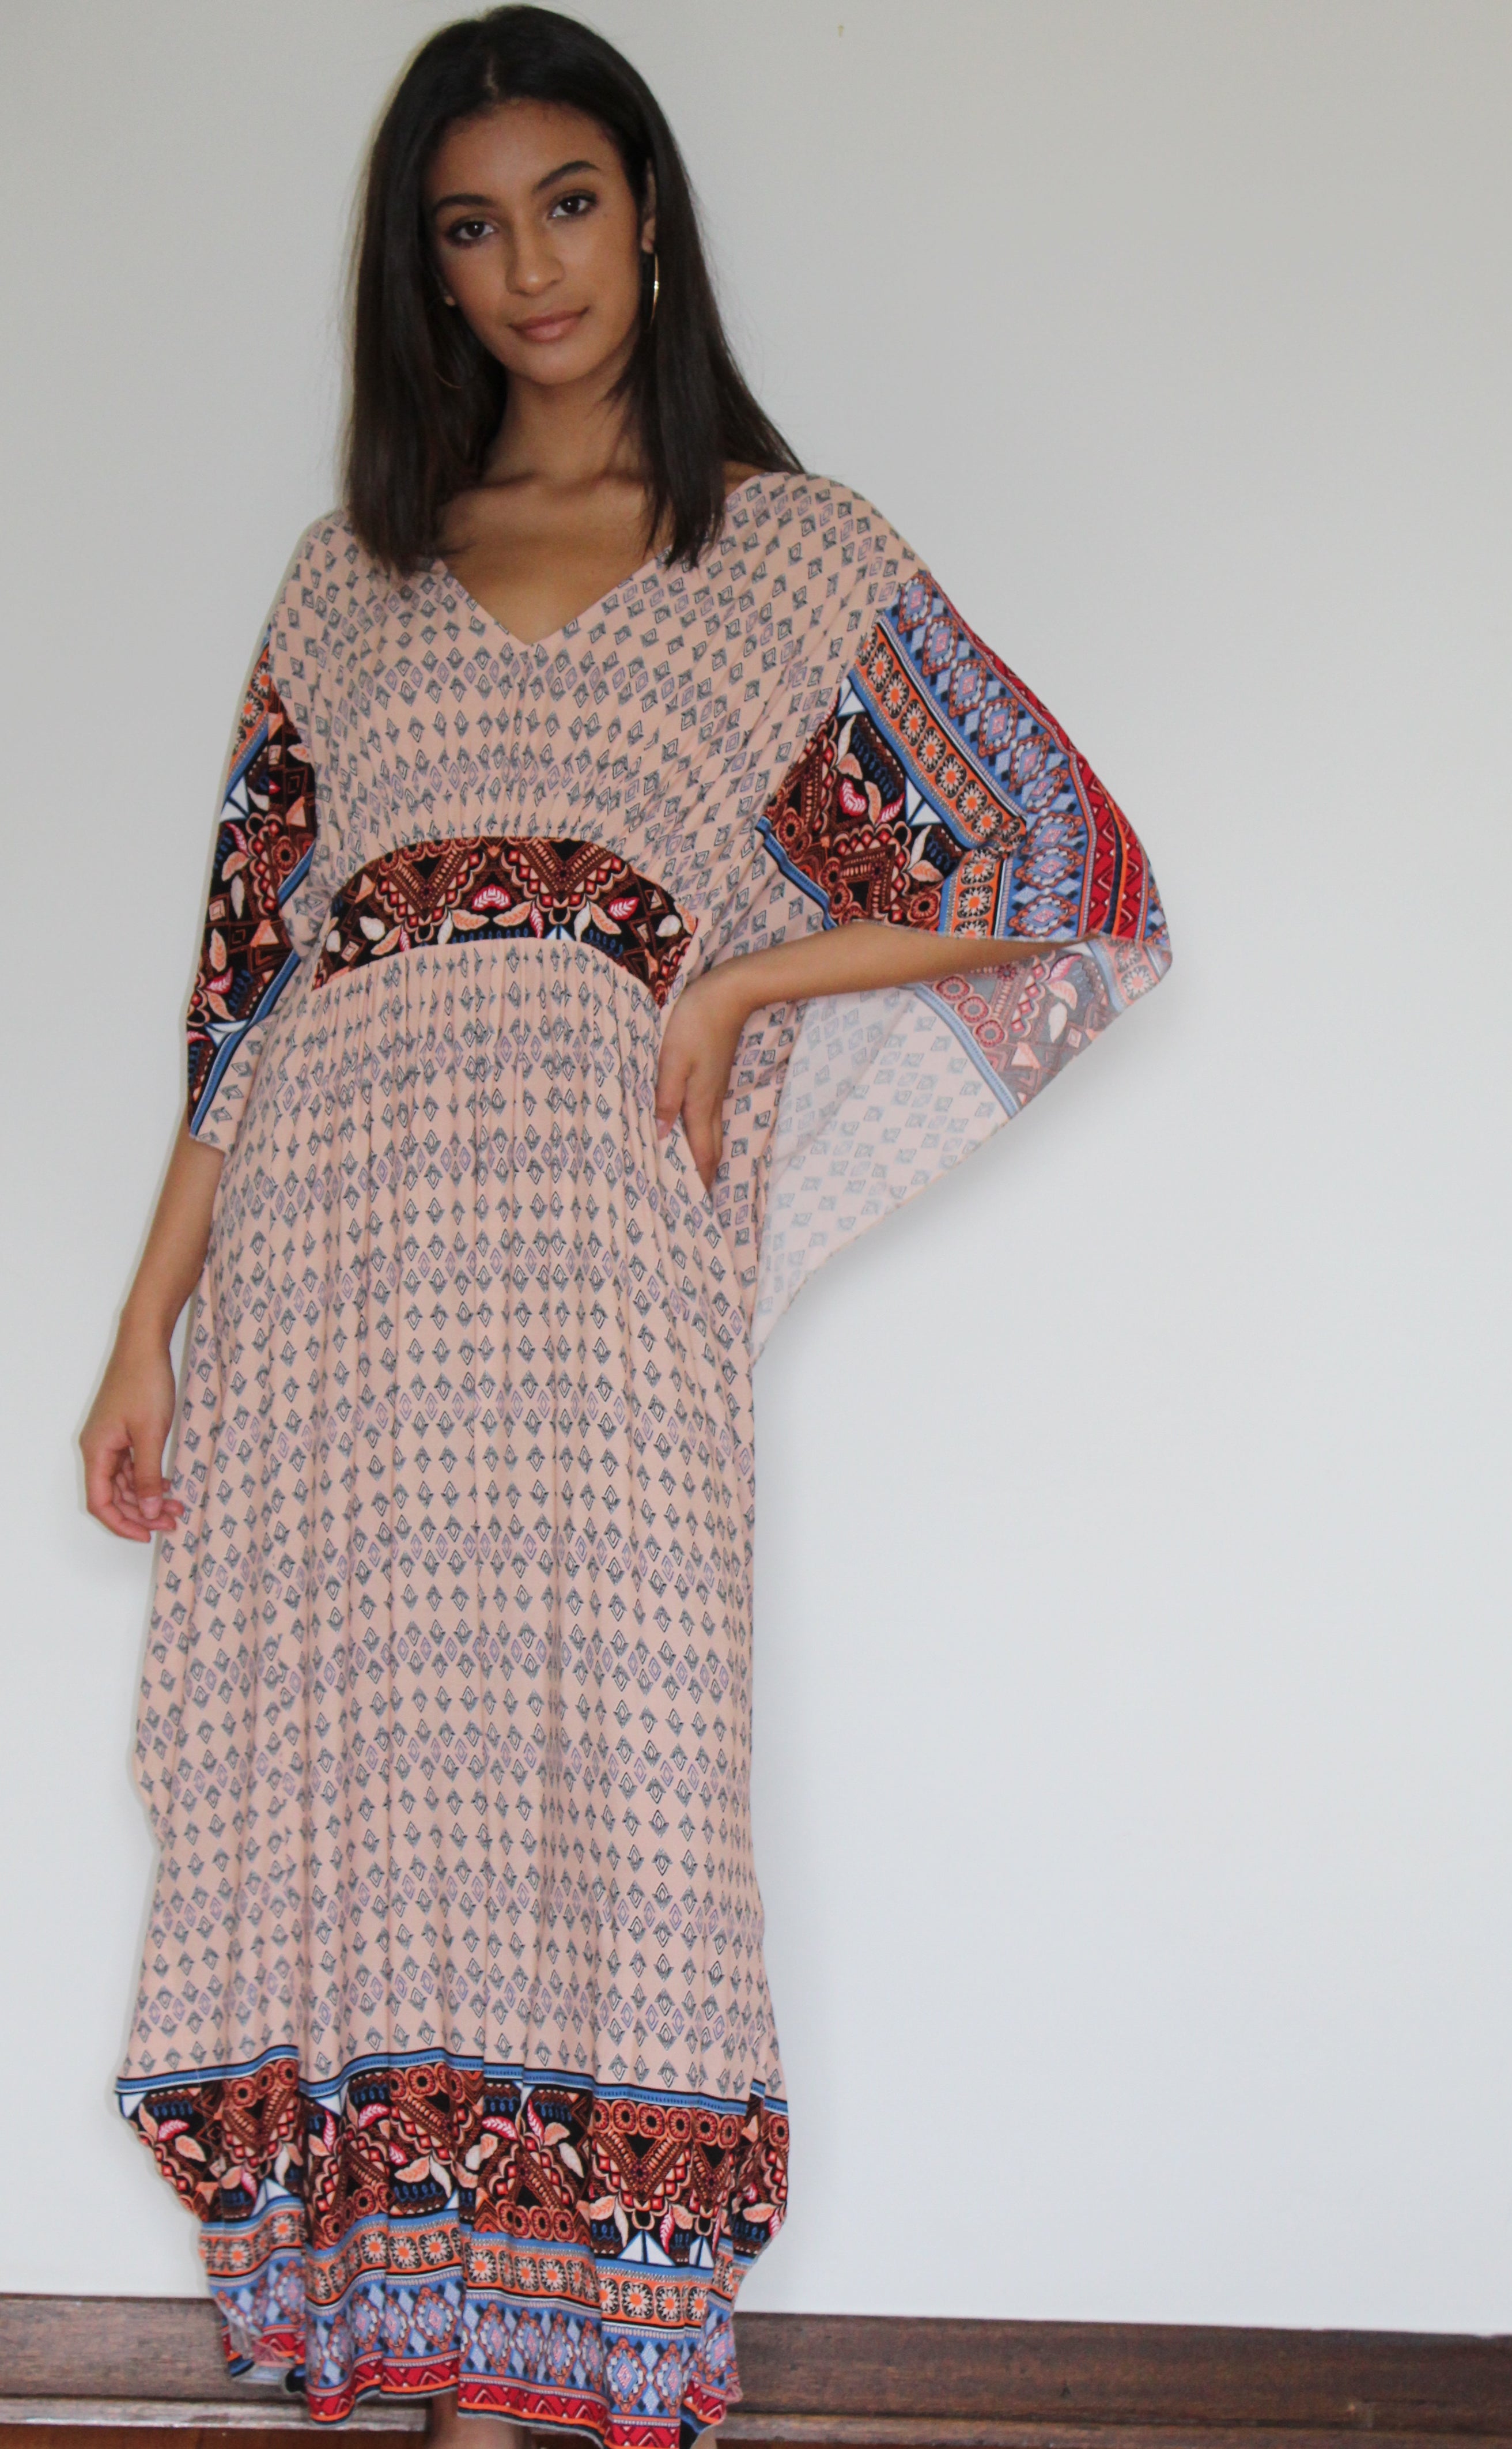 Tangier Nude Winged Kaftan - Yoga Clothing by Daughters of Culture